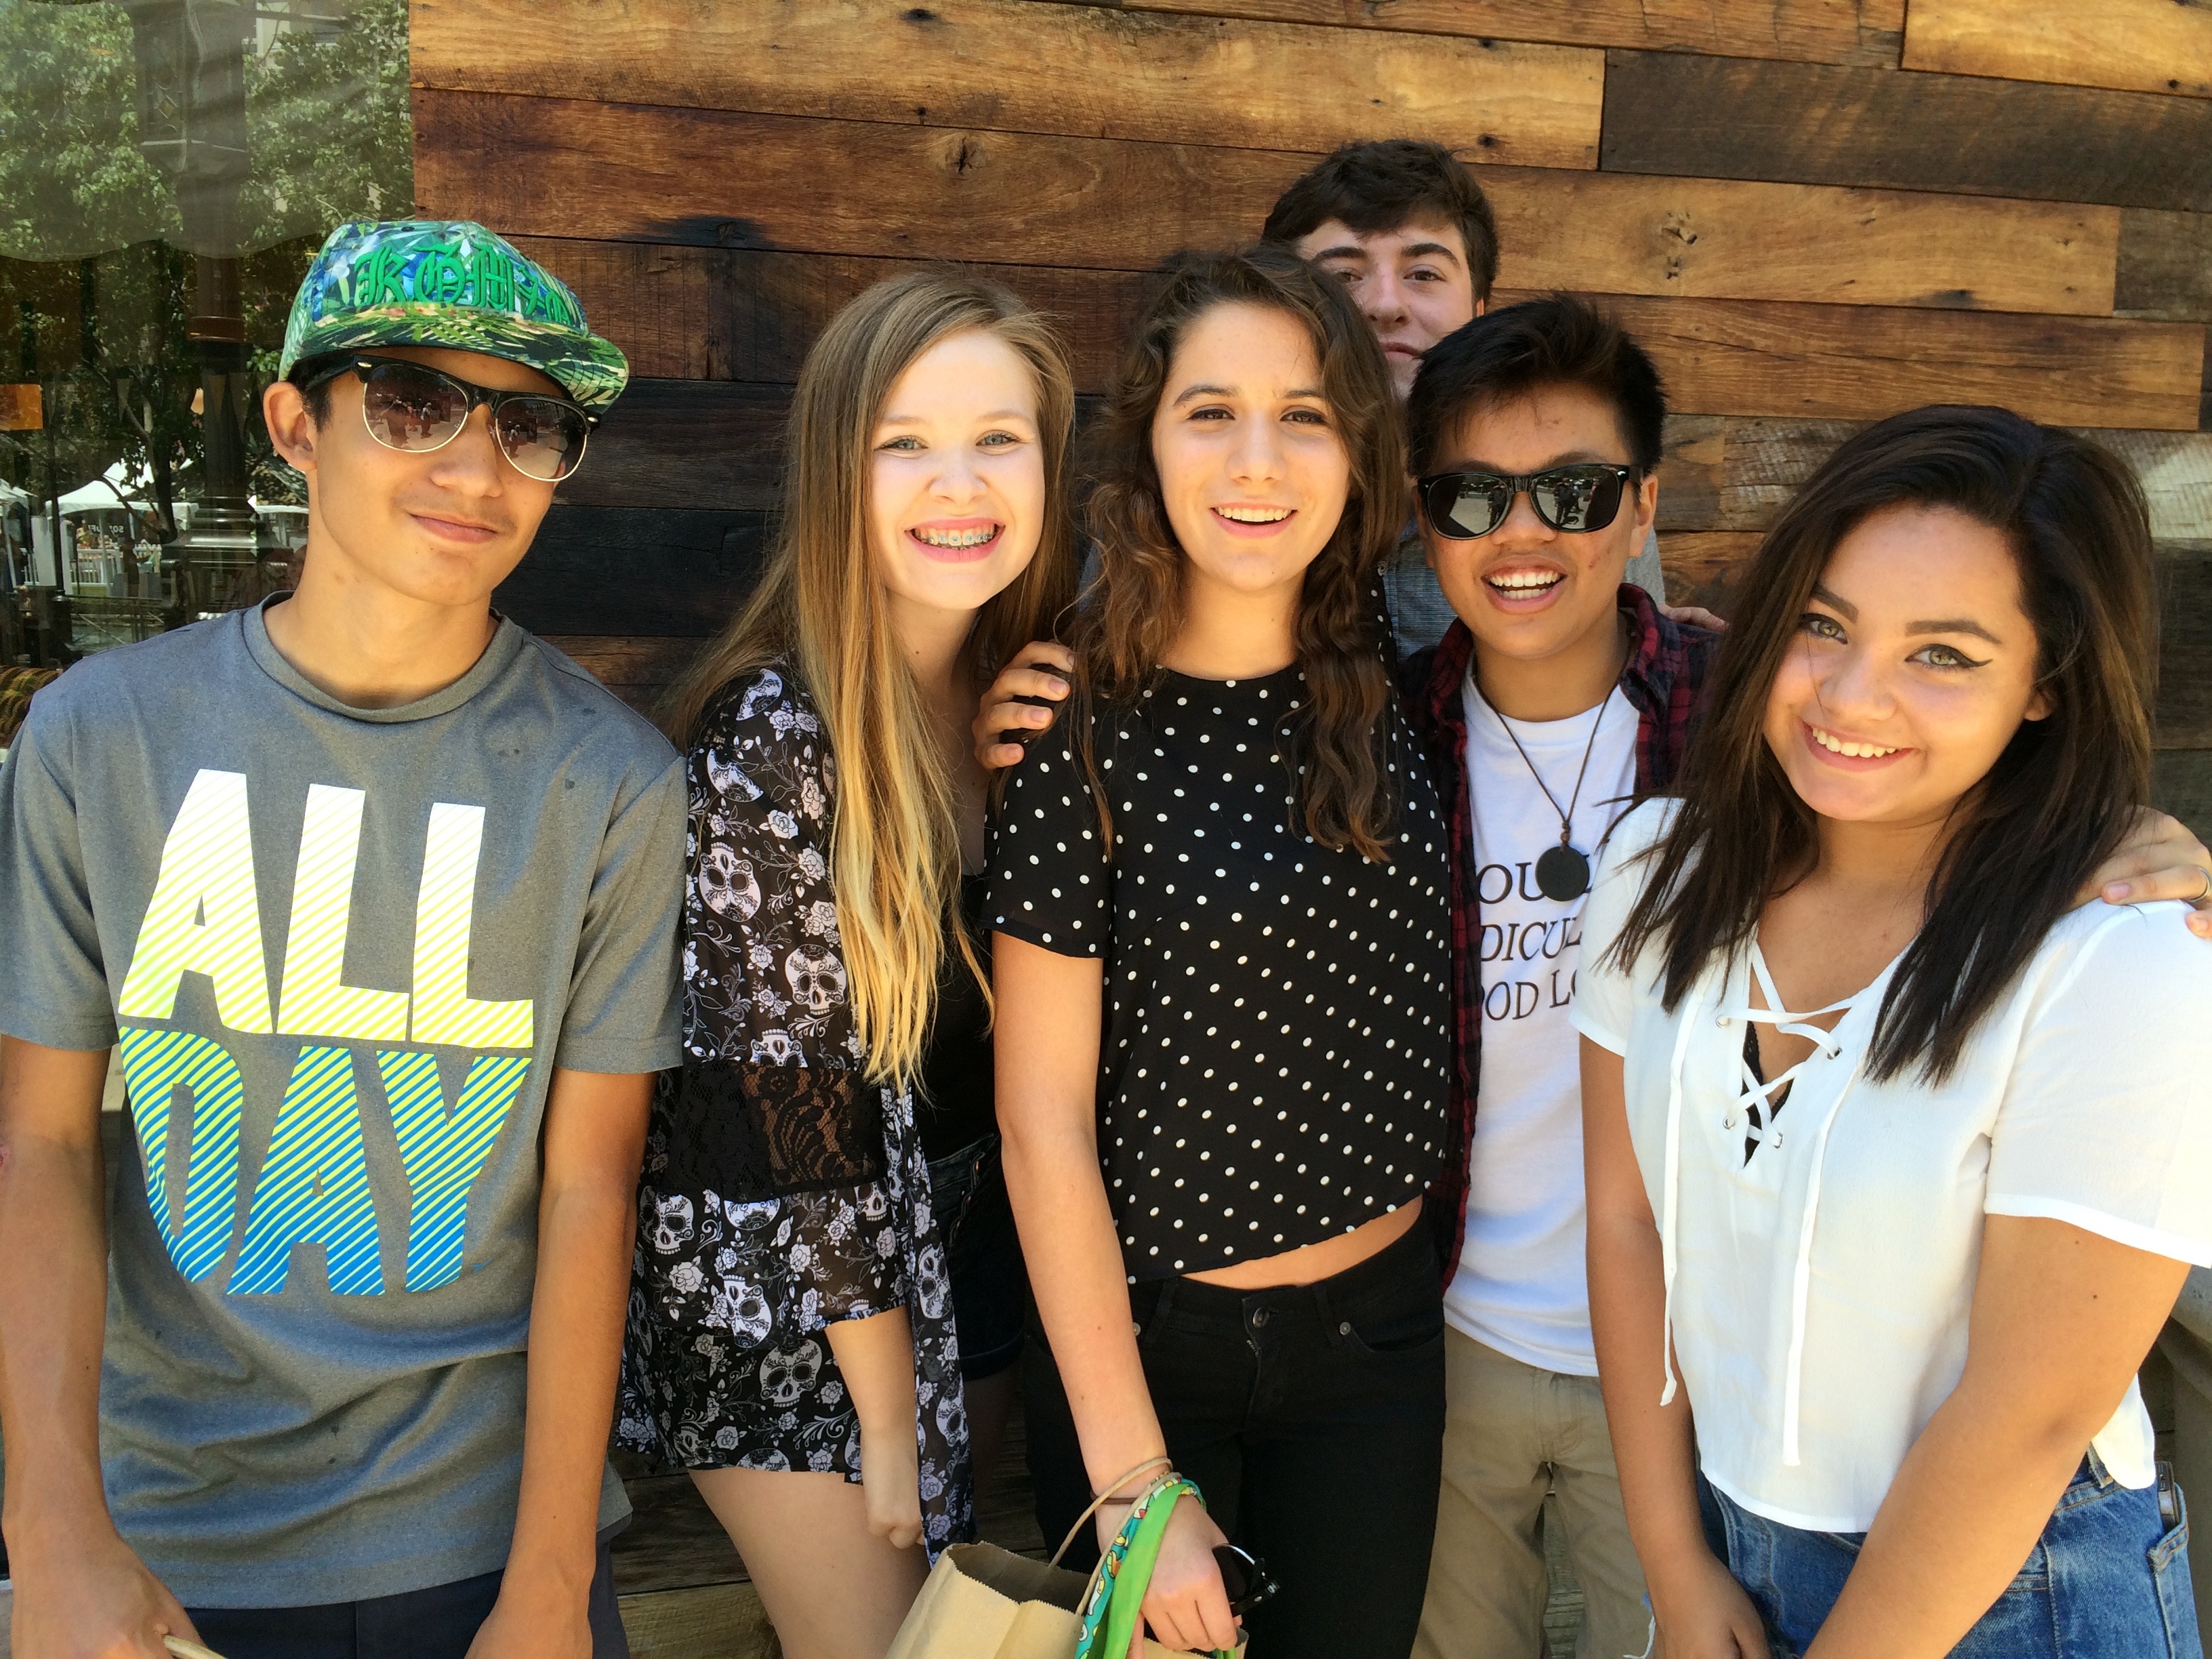 Anneke DiPietro (center) and her “Xirkl” of friends at the Americana in Glendale, CA. (From left) Sam Ankeny, Sara Schulze, Luke Ready, Skylar Jung and Holland Capps